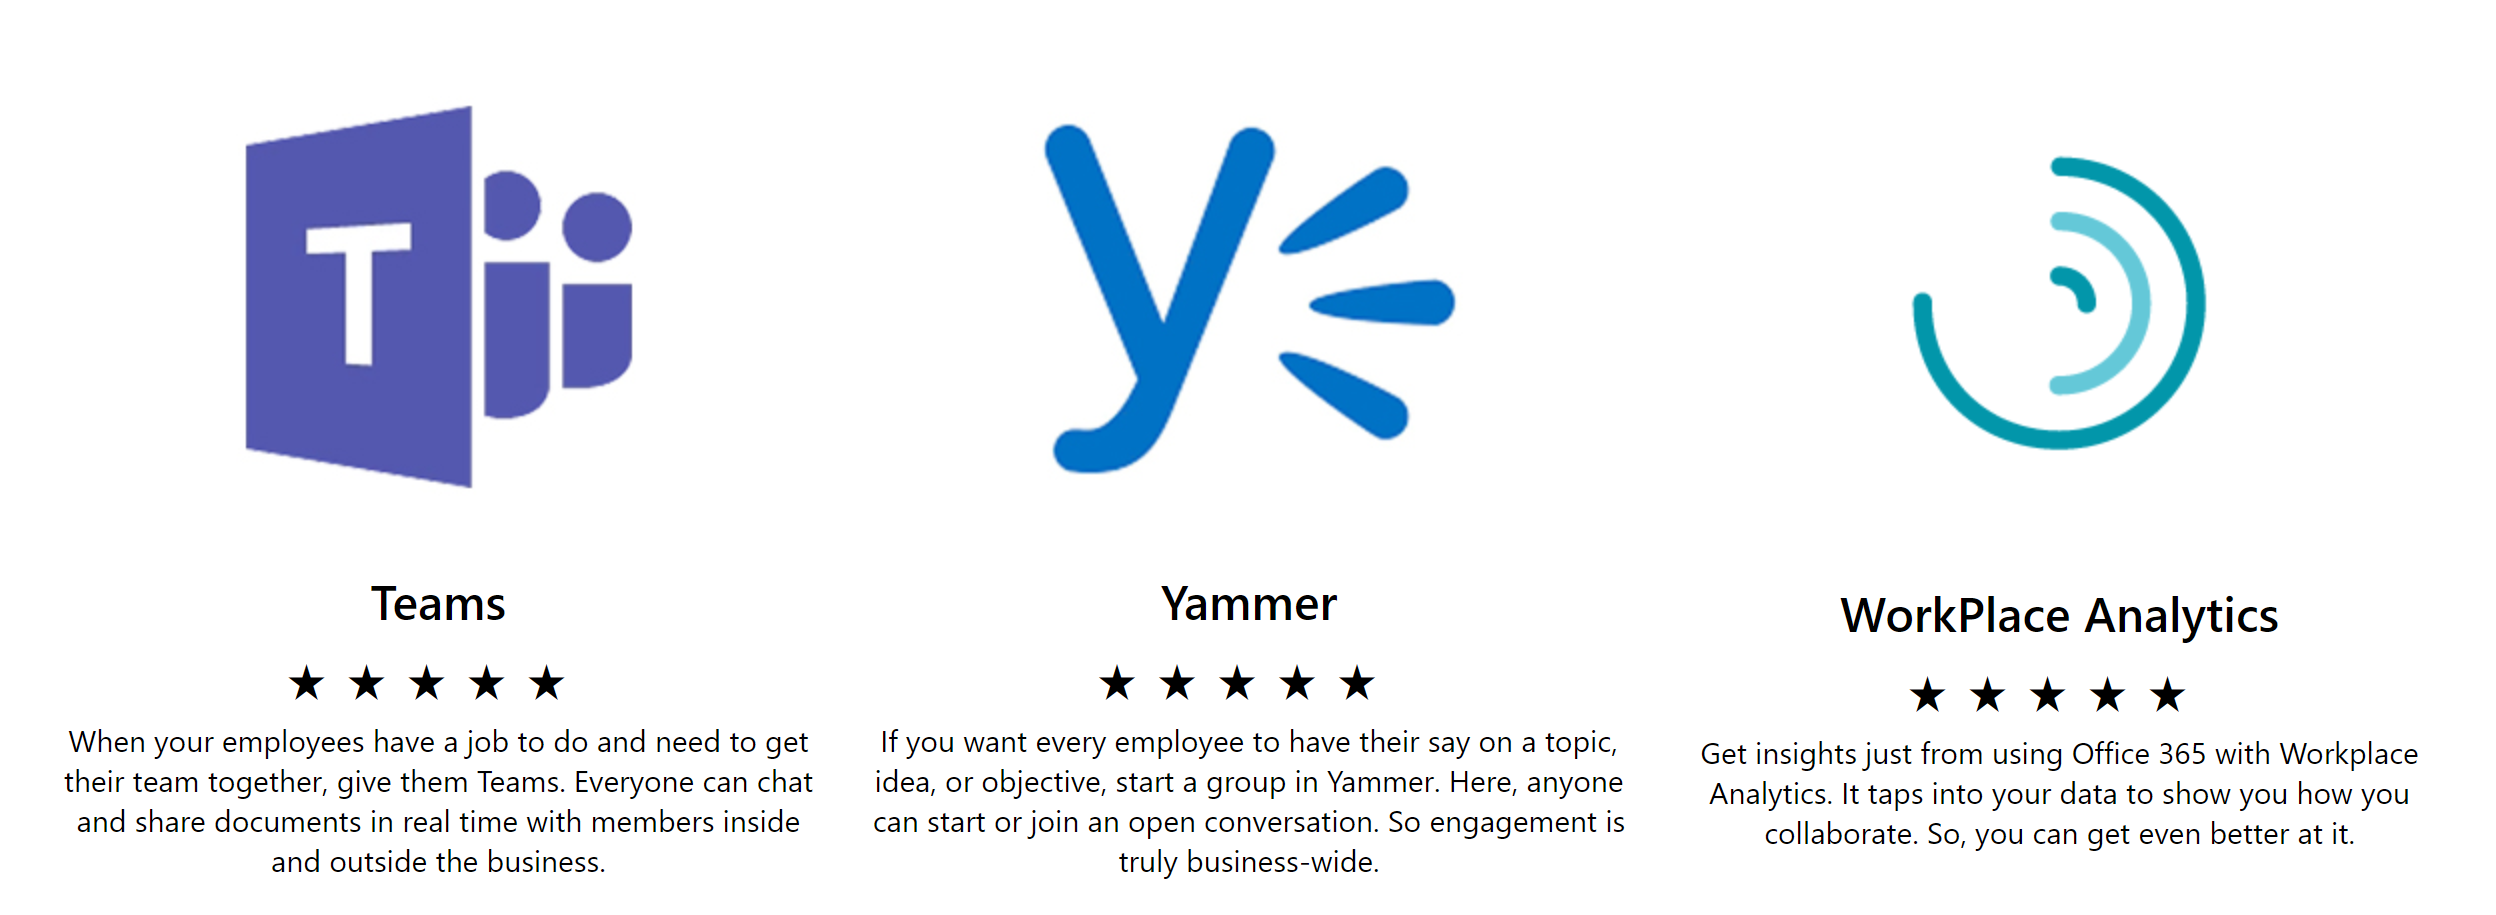 Teams, Yammer and Workplace Analytics logos